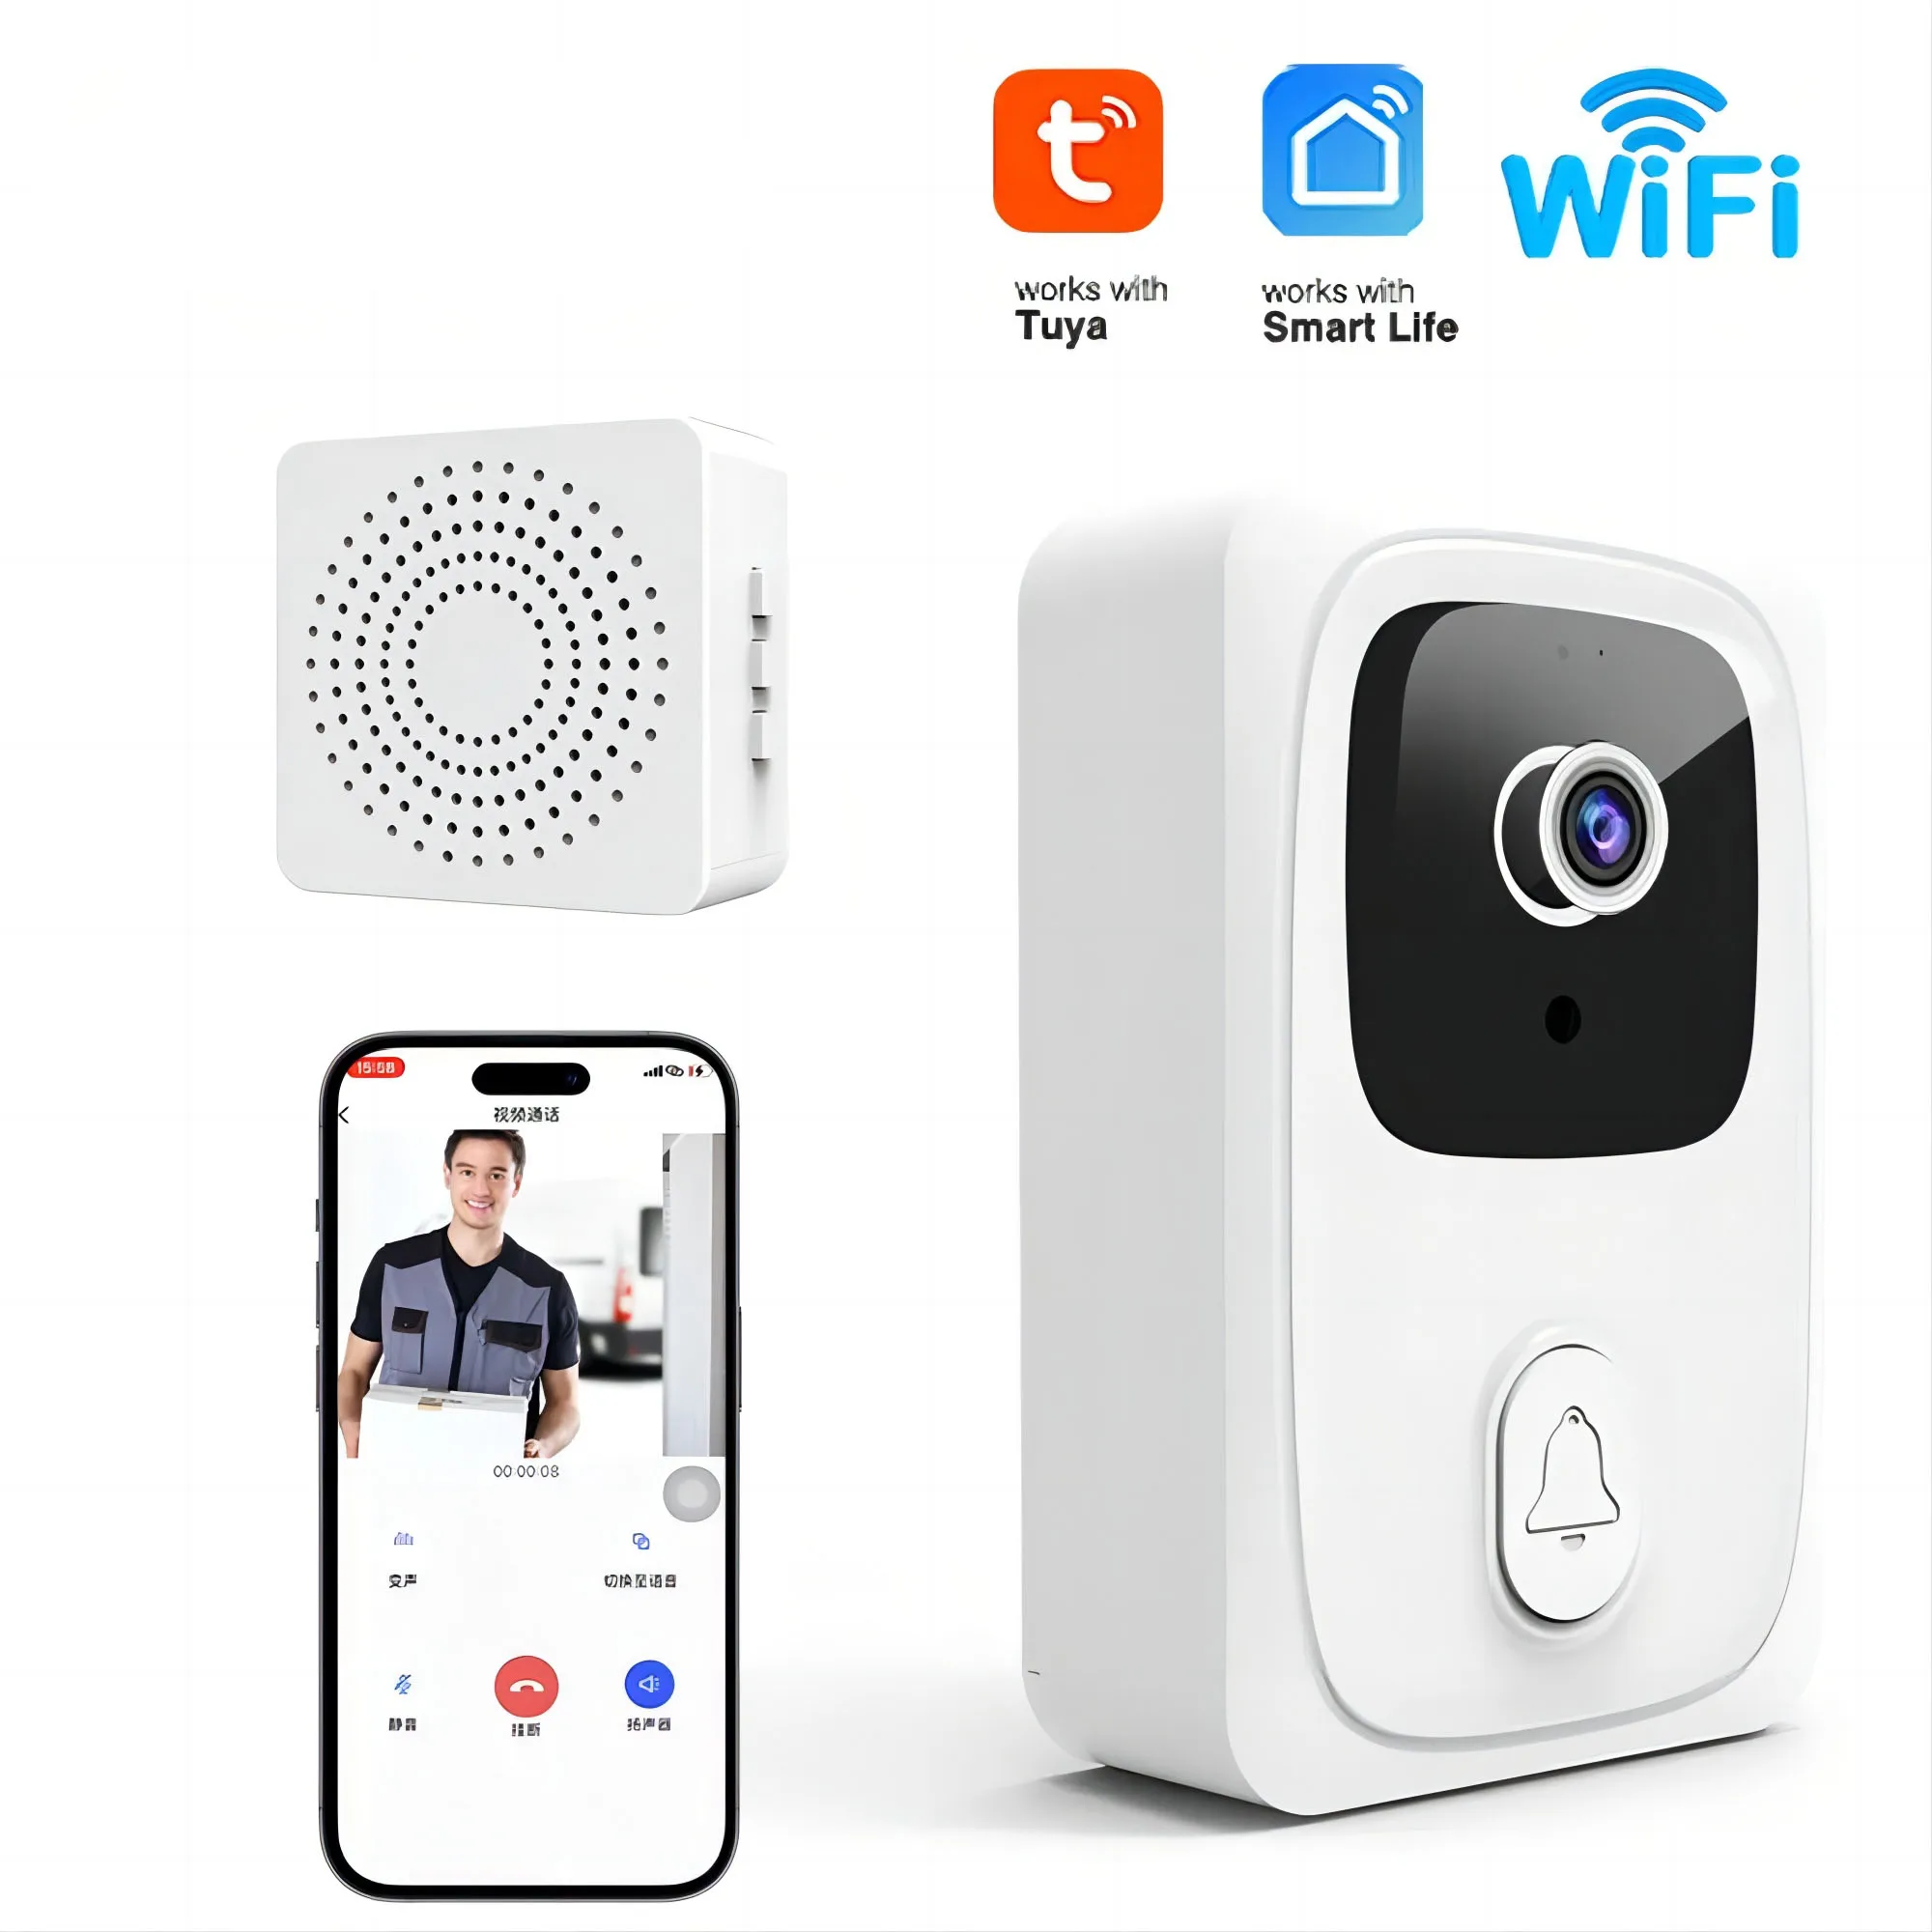 Tuya Video Doorbell Wireless WiFi Door Bell Camera Smart Home Security Night Vision Motion Detection Visual Intercom with Chime t9 hd 1080p smart wifi video doorbell camera visual intercom night vision ip audio door bell wireless home security pir cameras